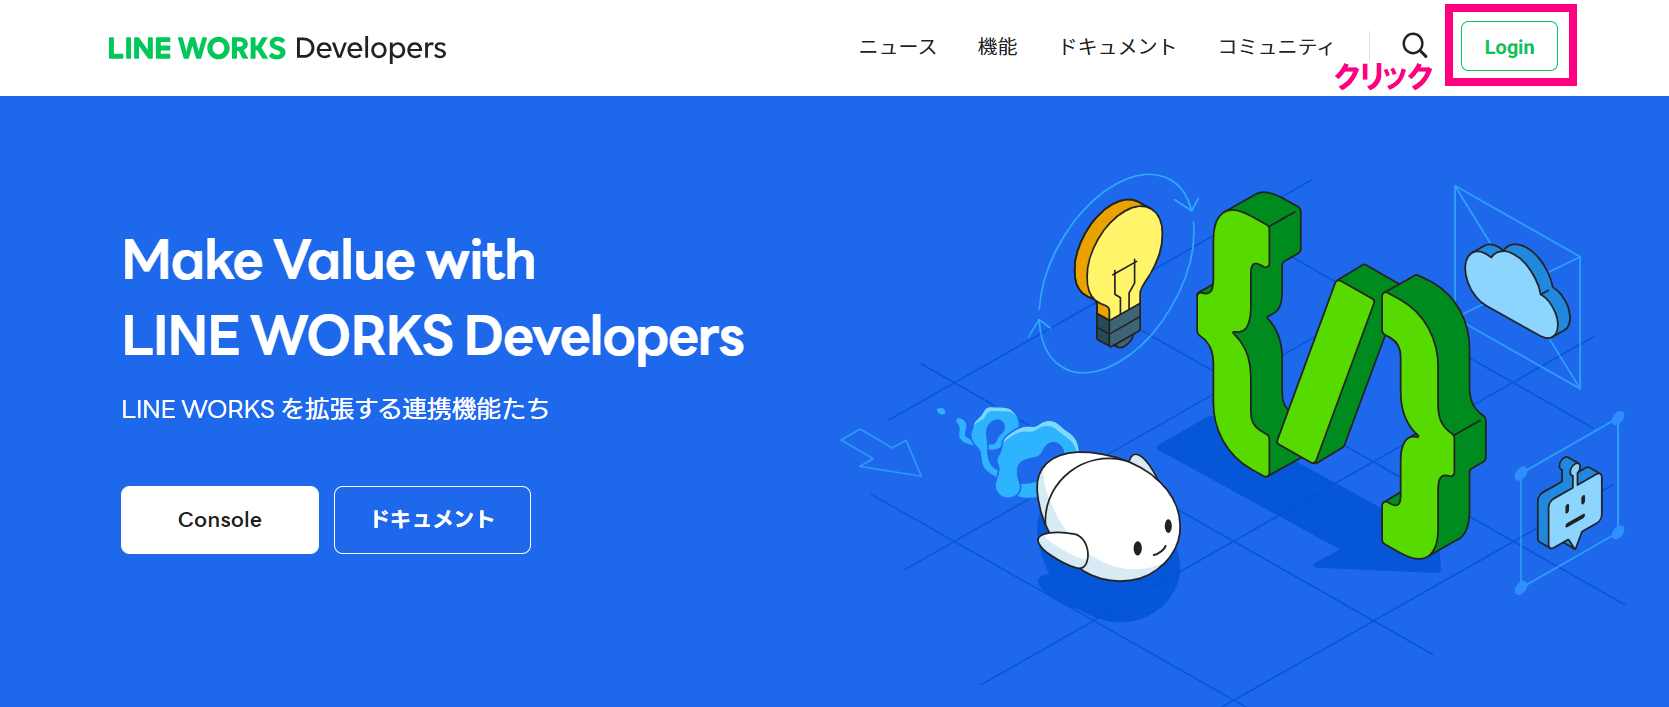 step1_LINE WORKS Developersログイン.png